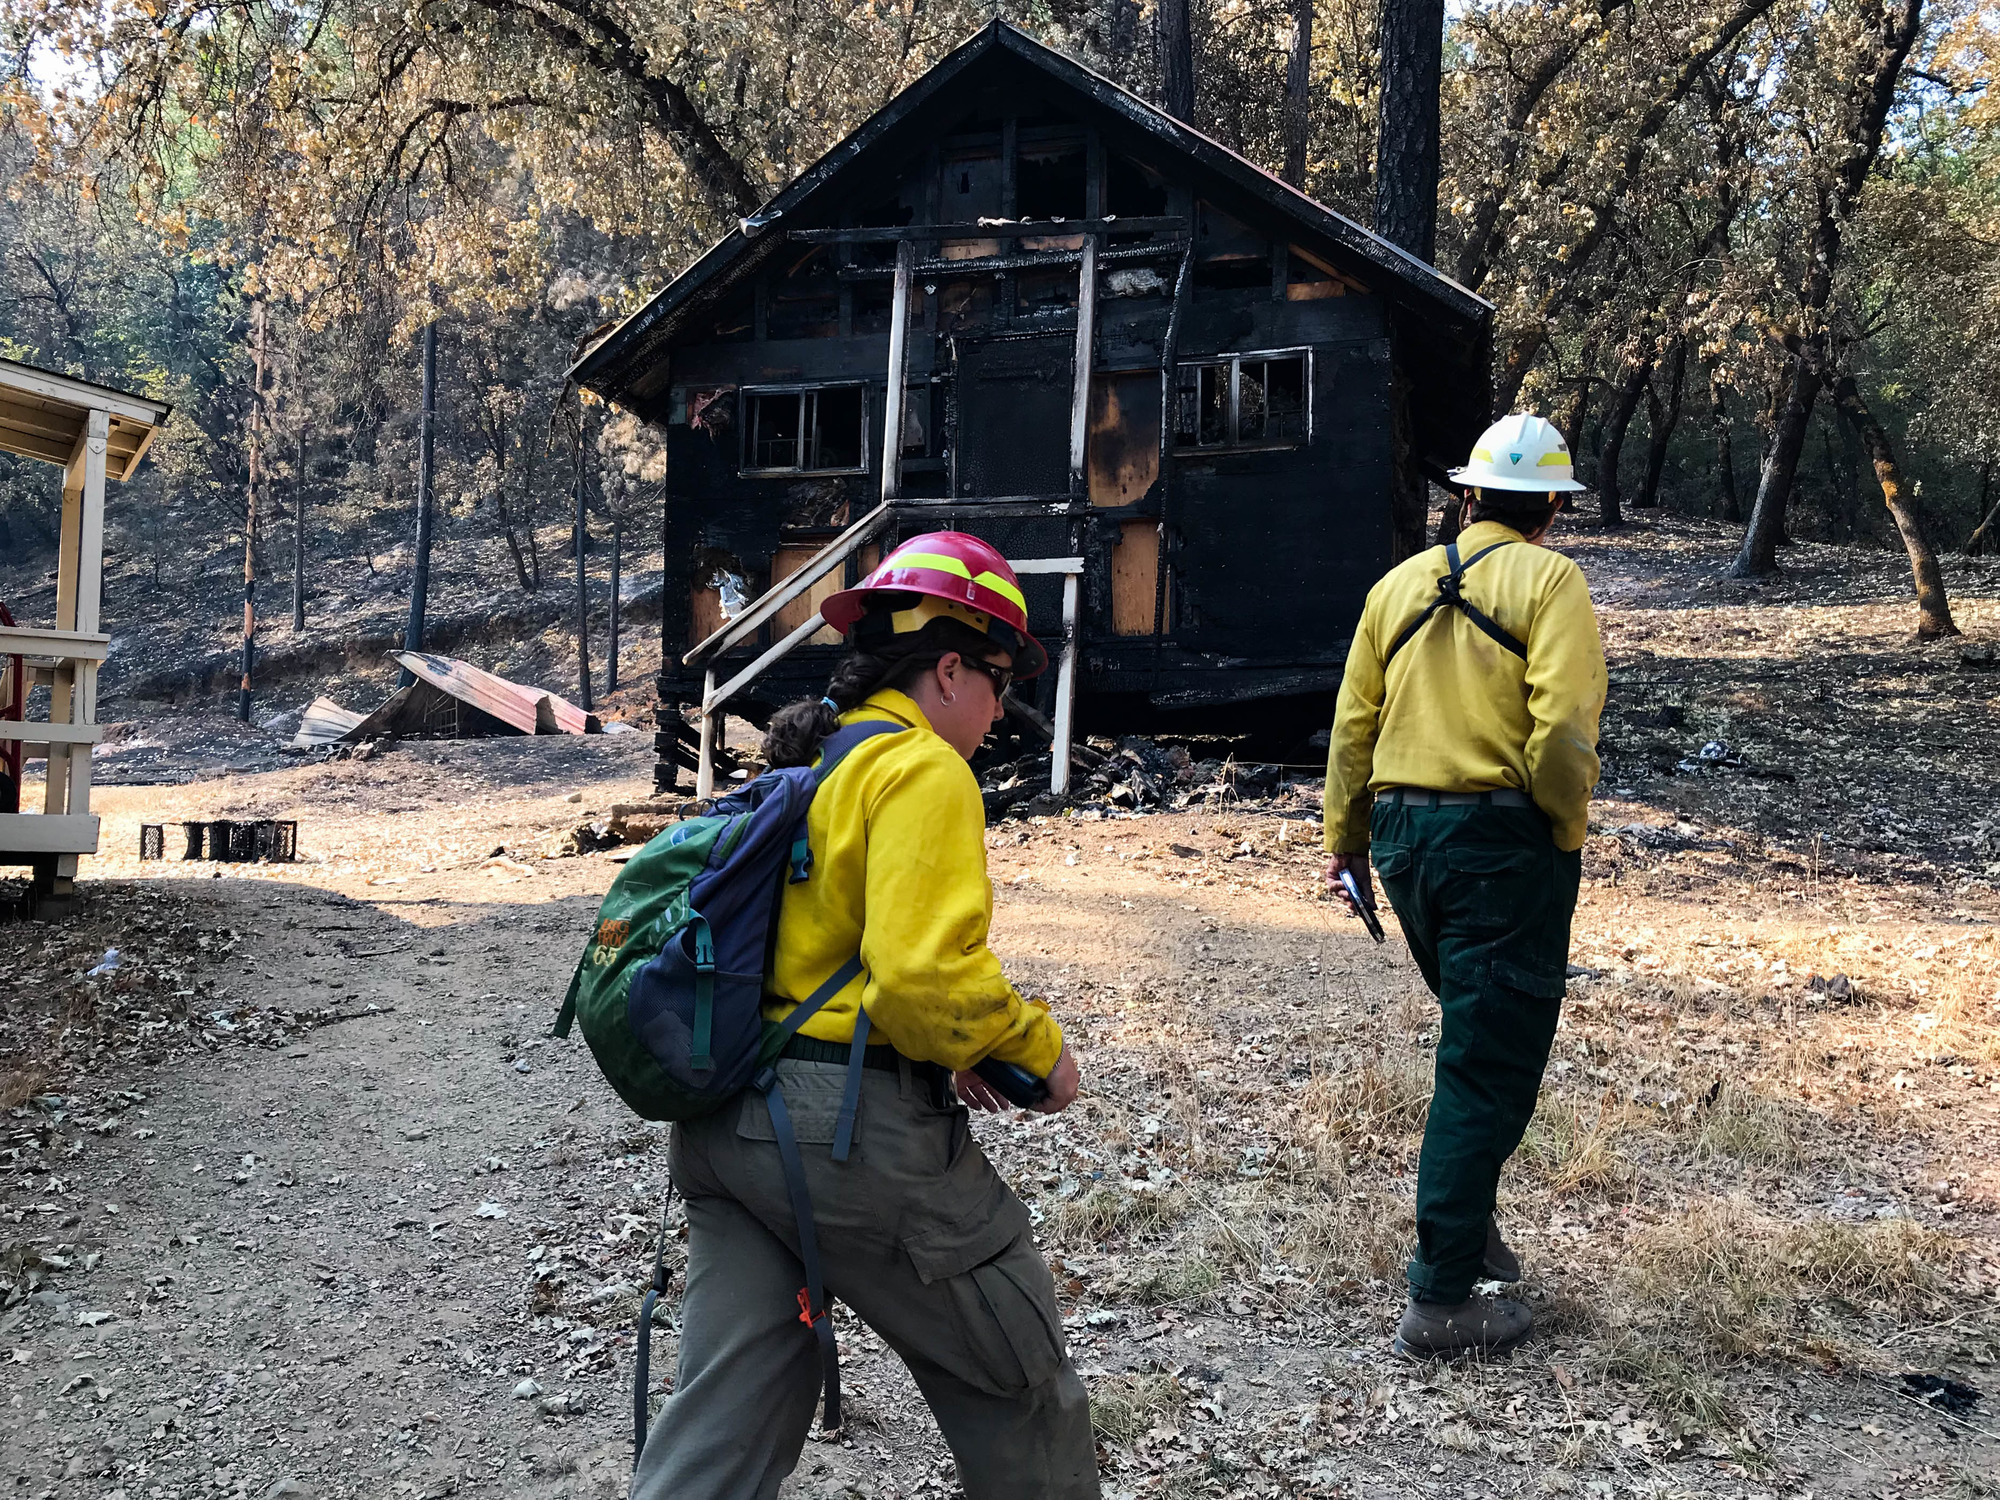 A hydrologist and geologist walking past a burnt cabin